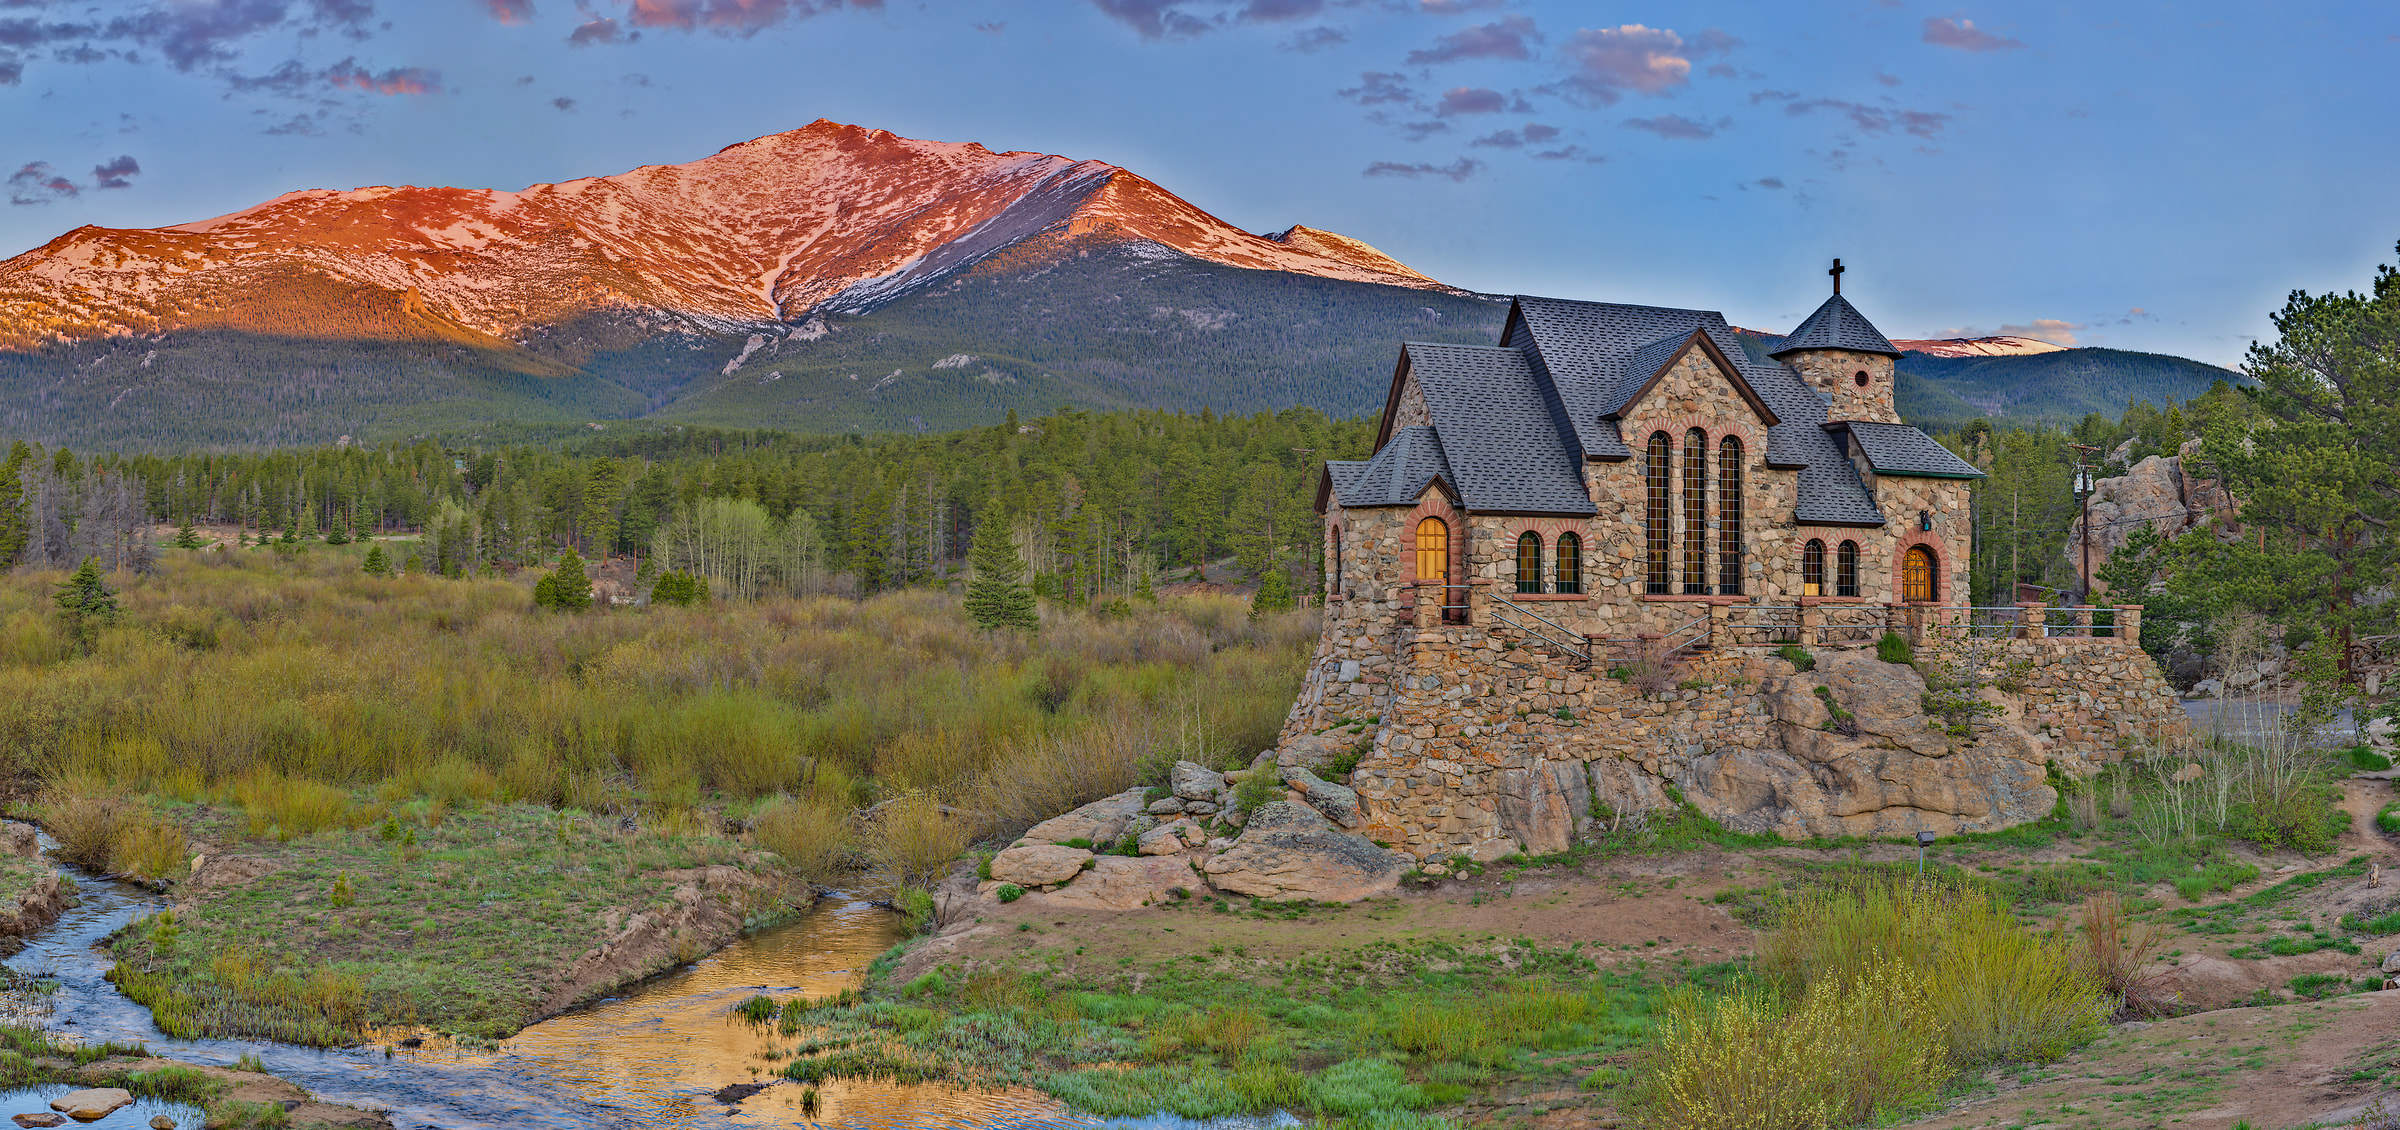 3,530 megapixels! A very high resolution, large-format VAST photo print of Saint Catherine's Chapel on the Rock; photograph created by John Freeman in Allenspark, Colorado